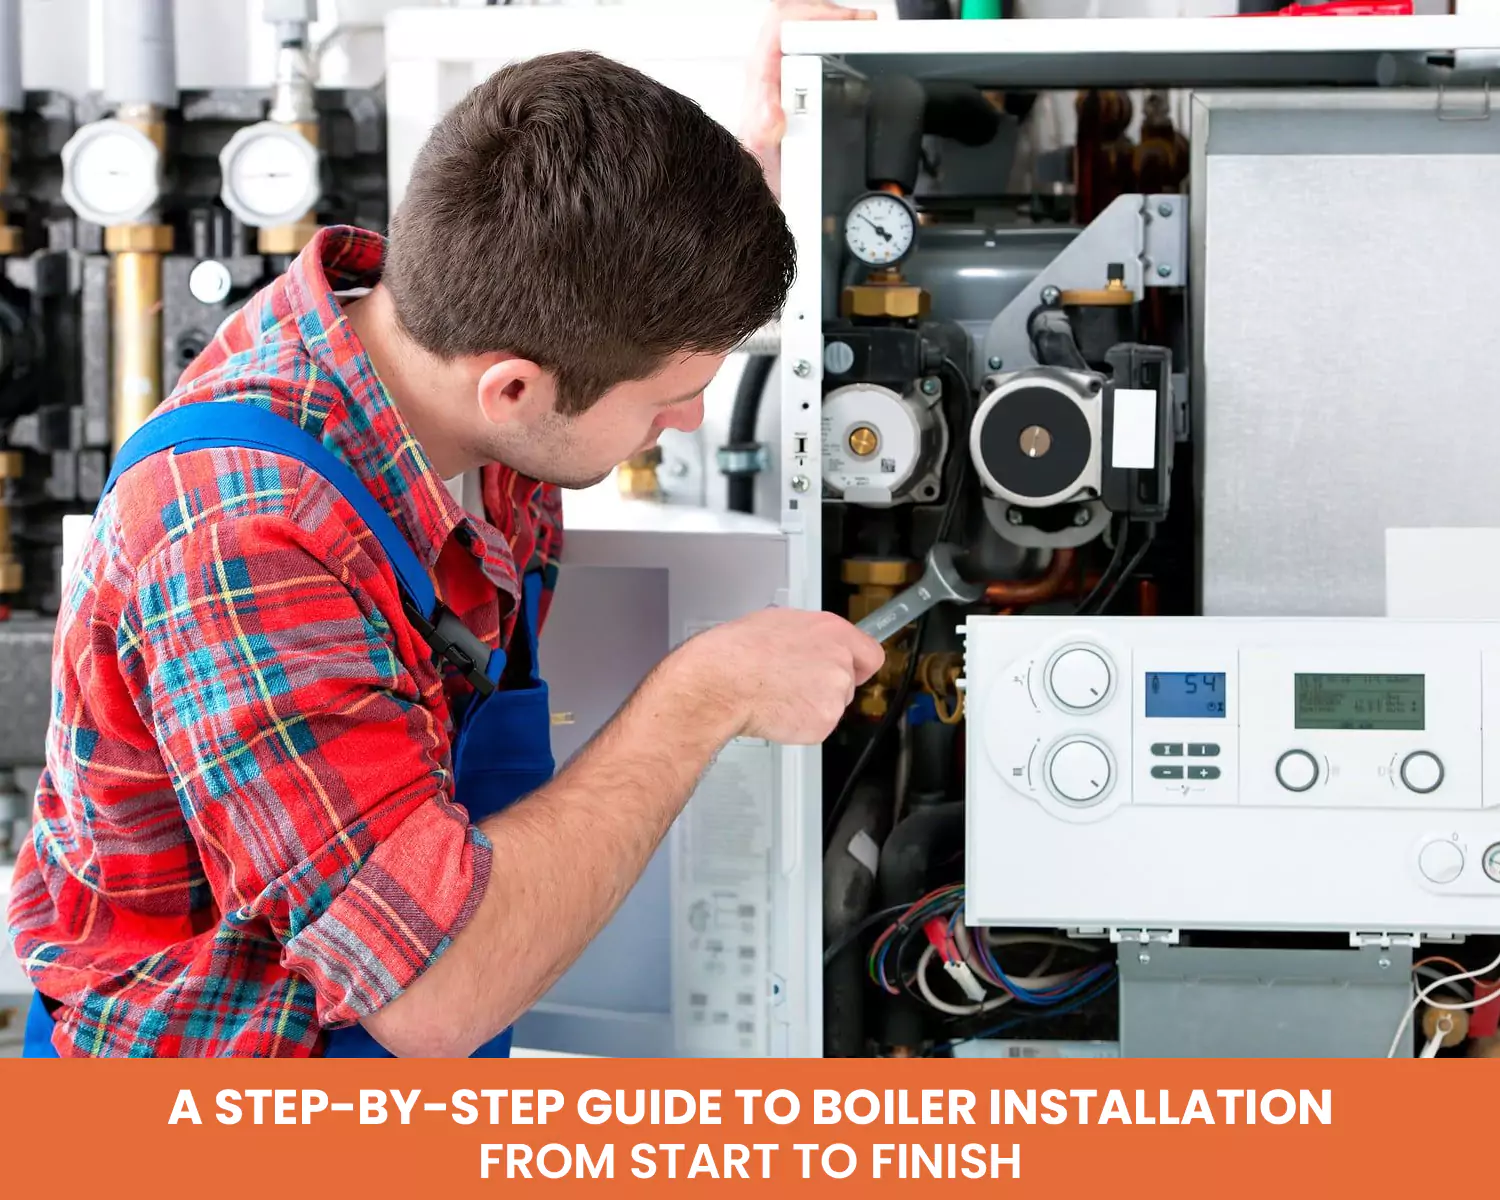 A Step-by-Step Guide to Boiler Installation: From Start to Finish